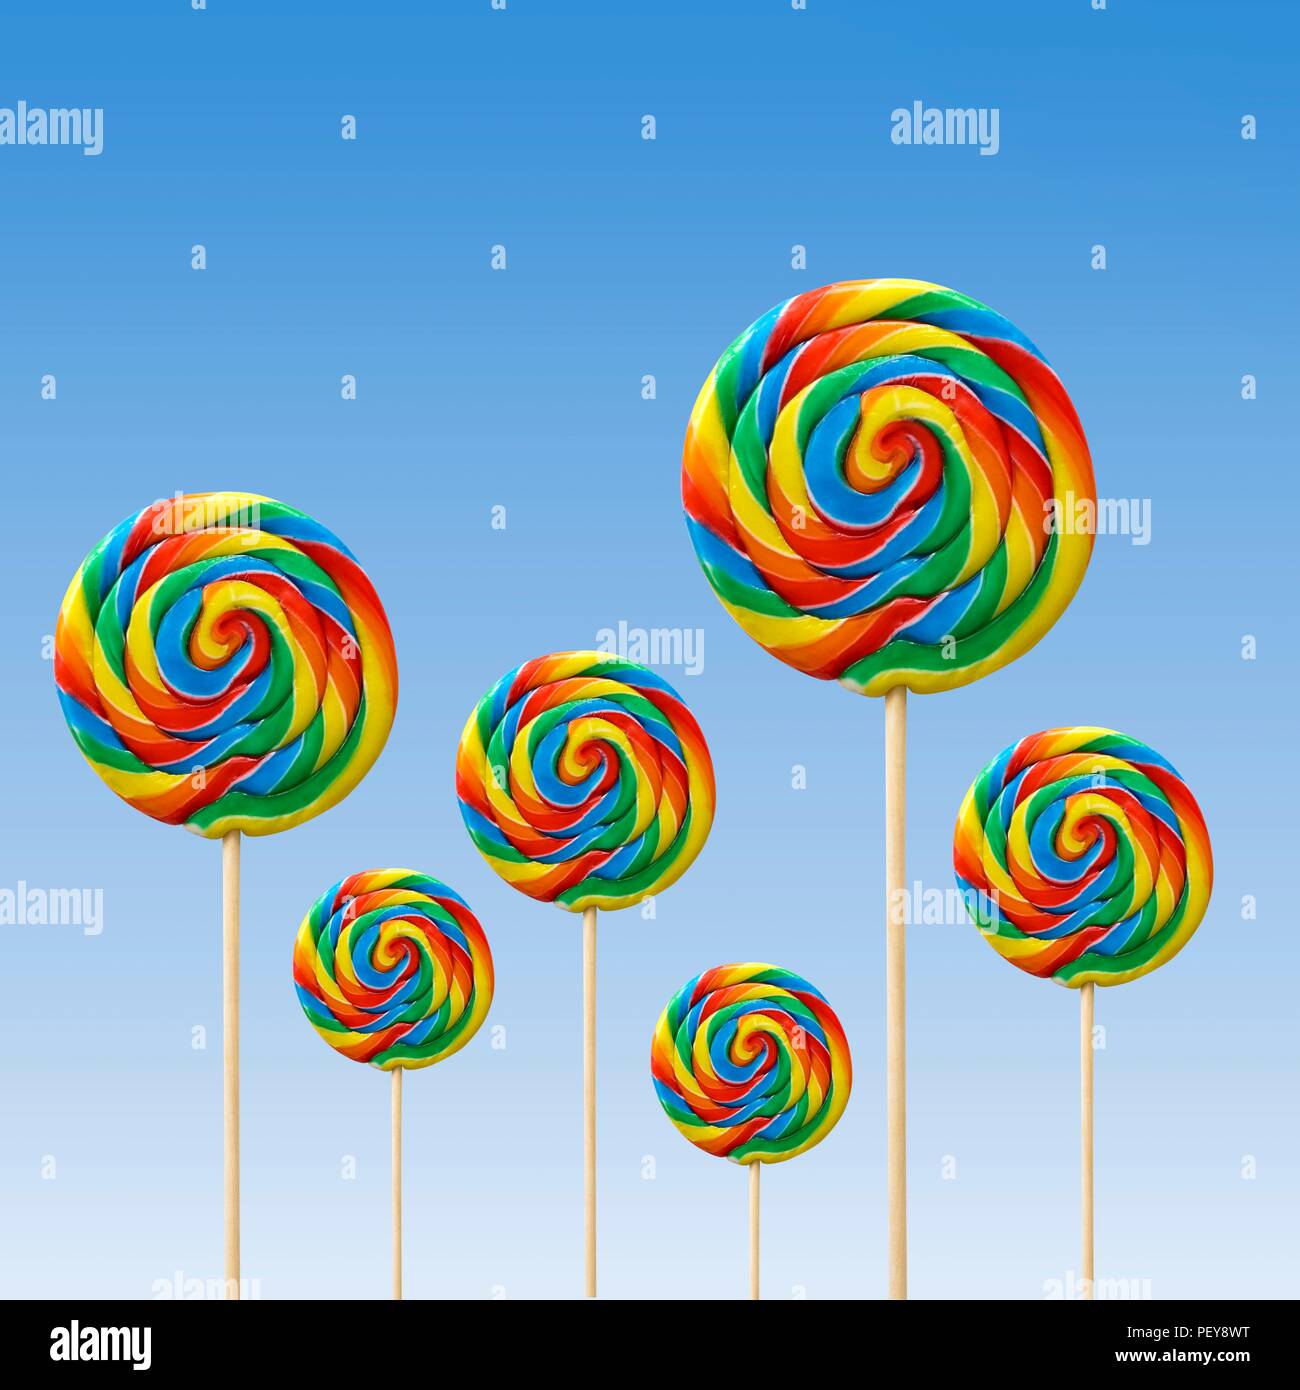 Bright coloured lollipops against a blue background. Stock Photo